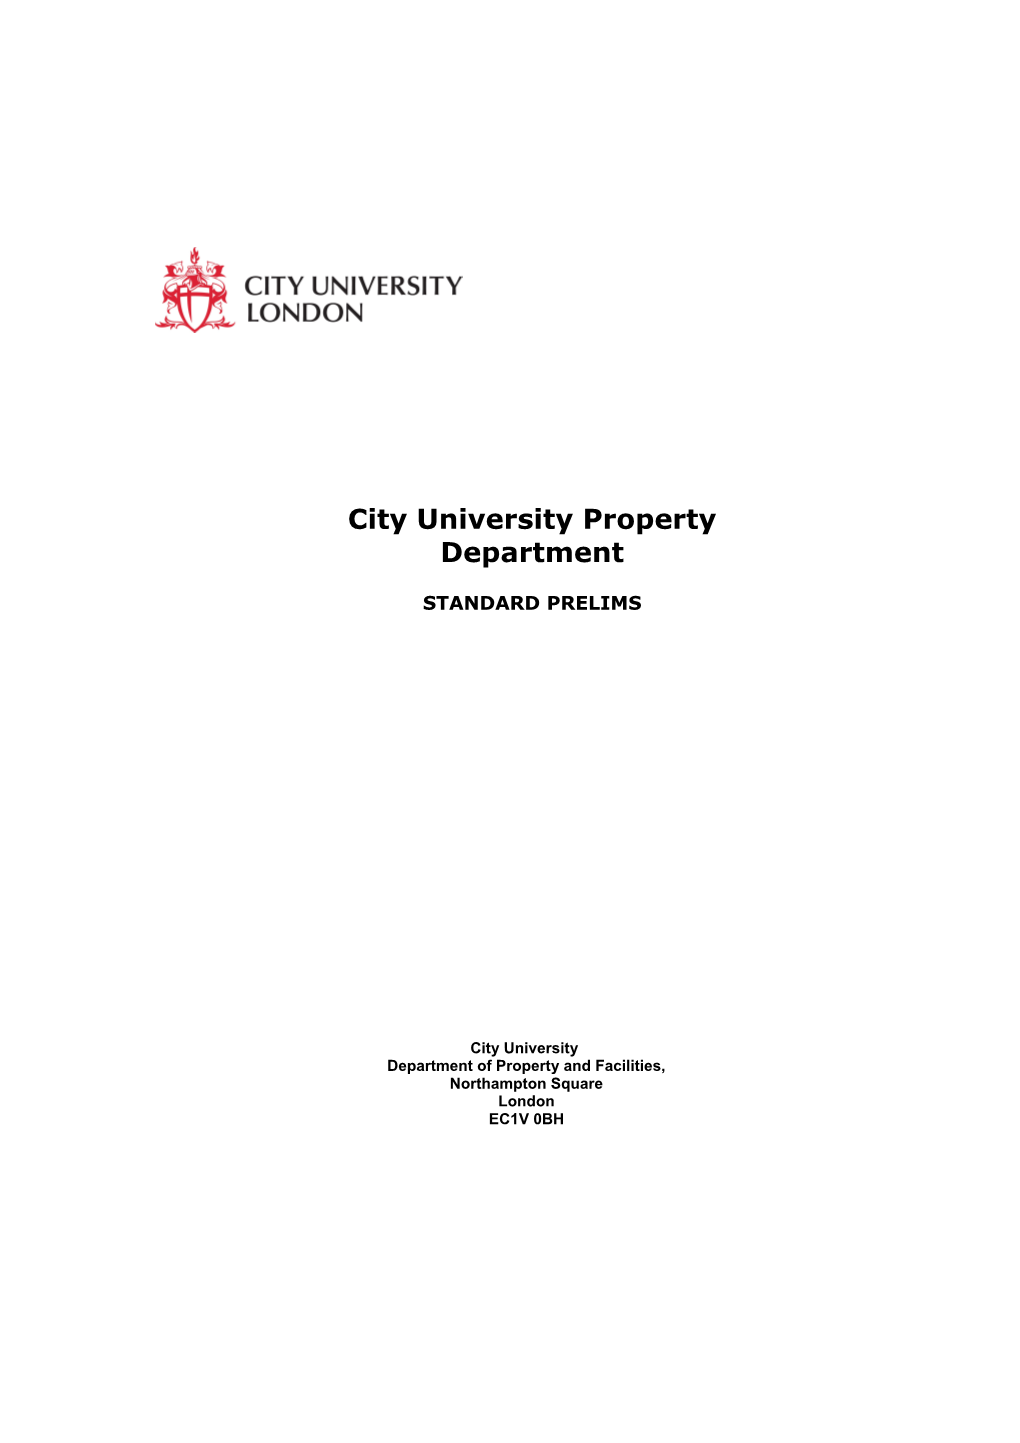 Department of Property and Facilities